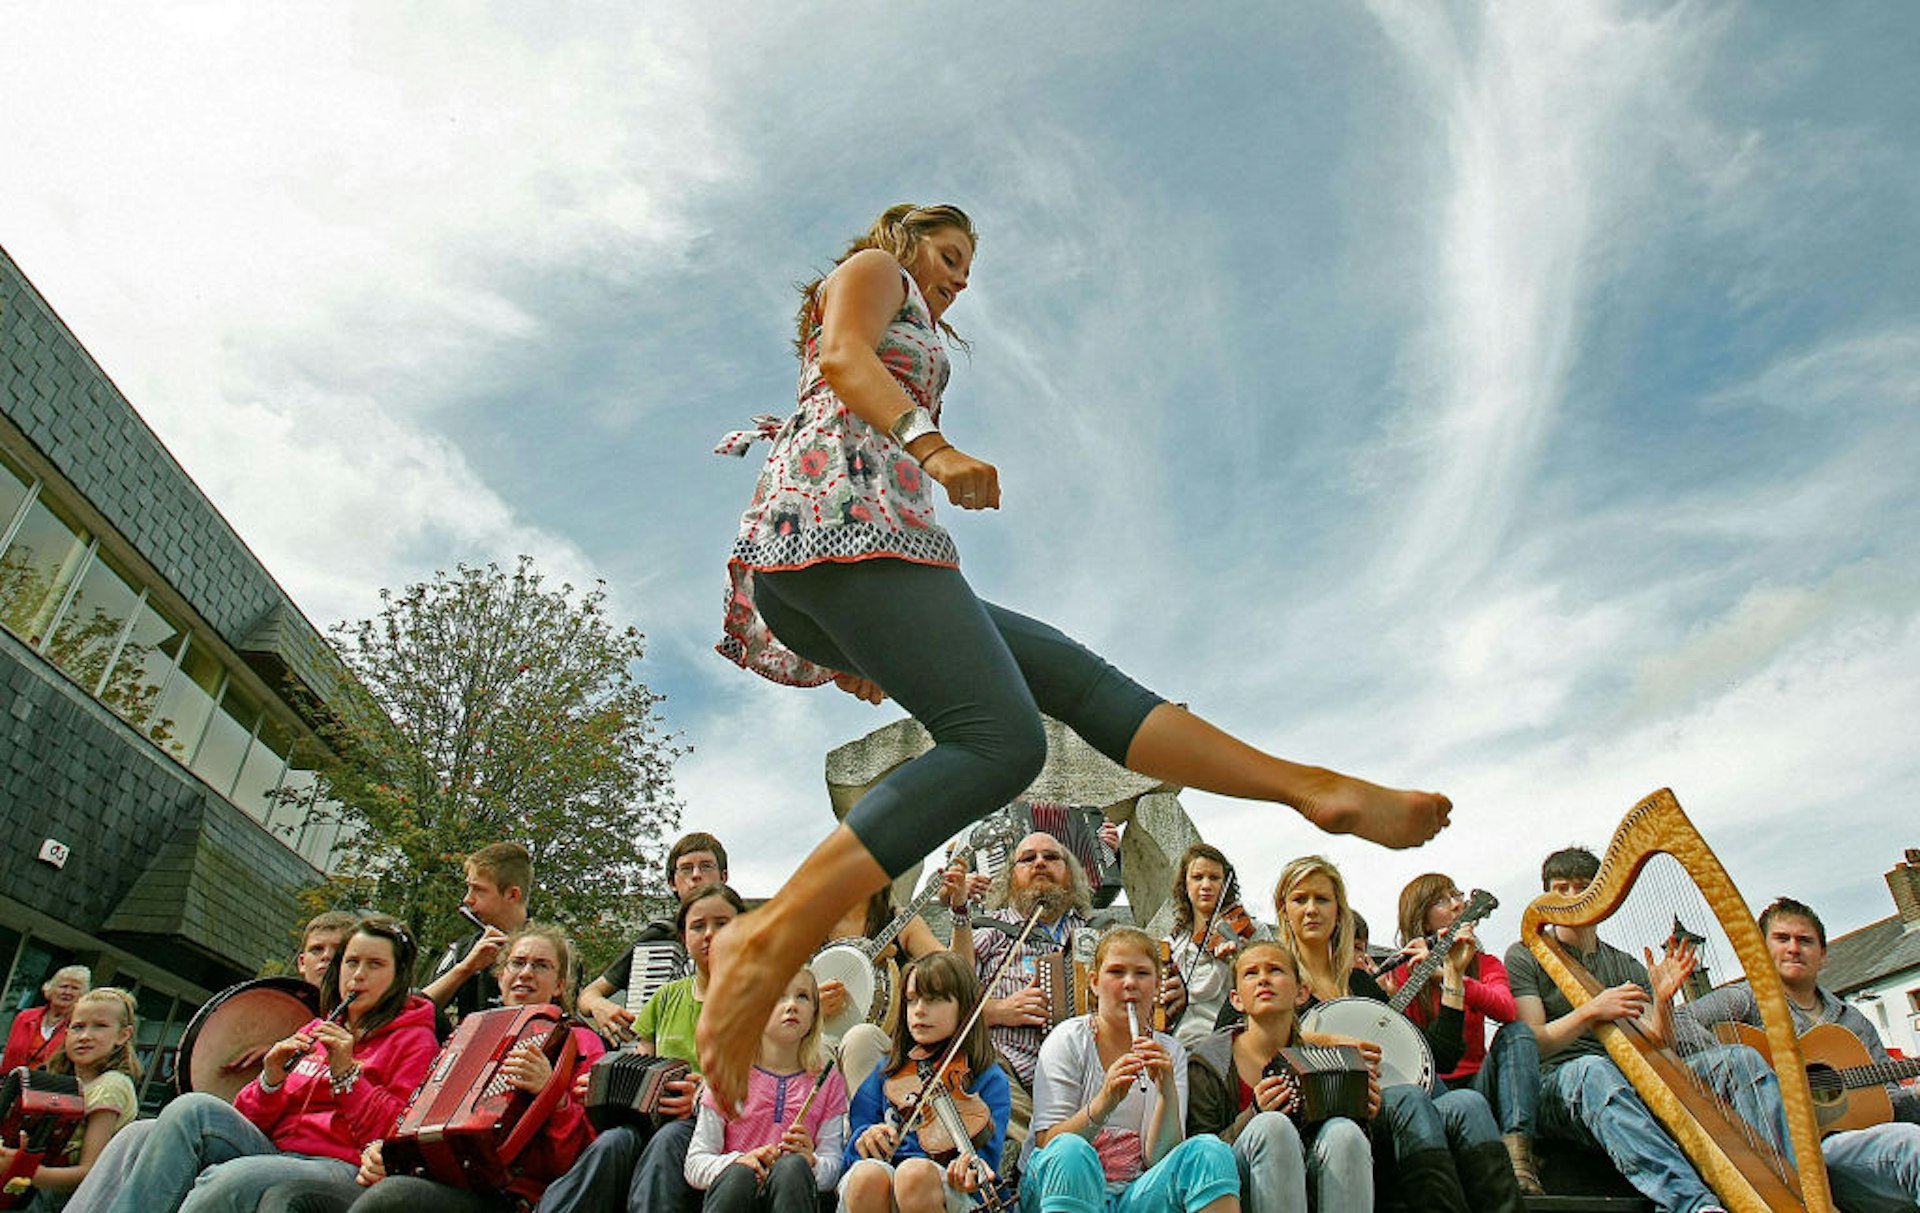 An Irish dancer in mid leap on a sunny day, with a crowd of young musicians playing traditional Irish instruments in the background.